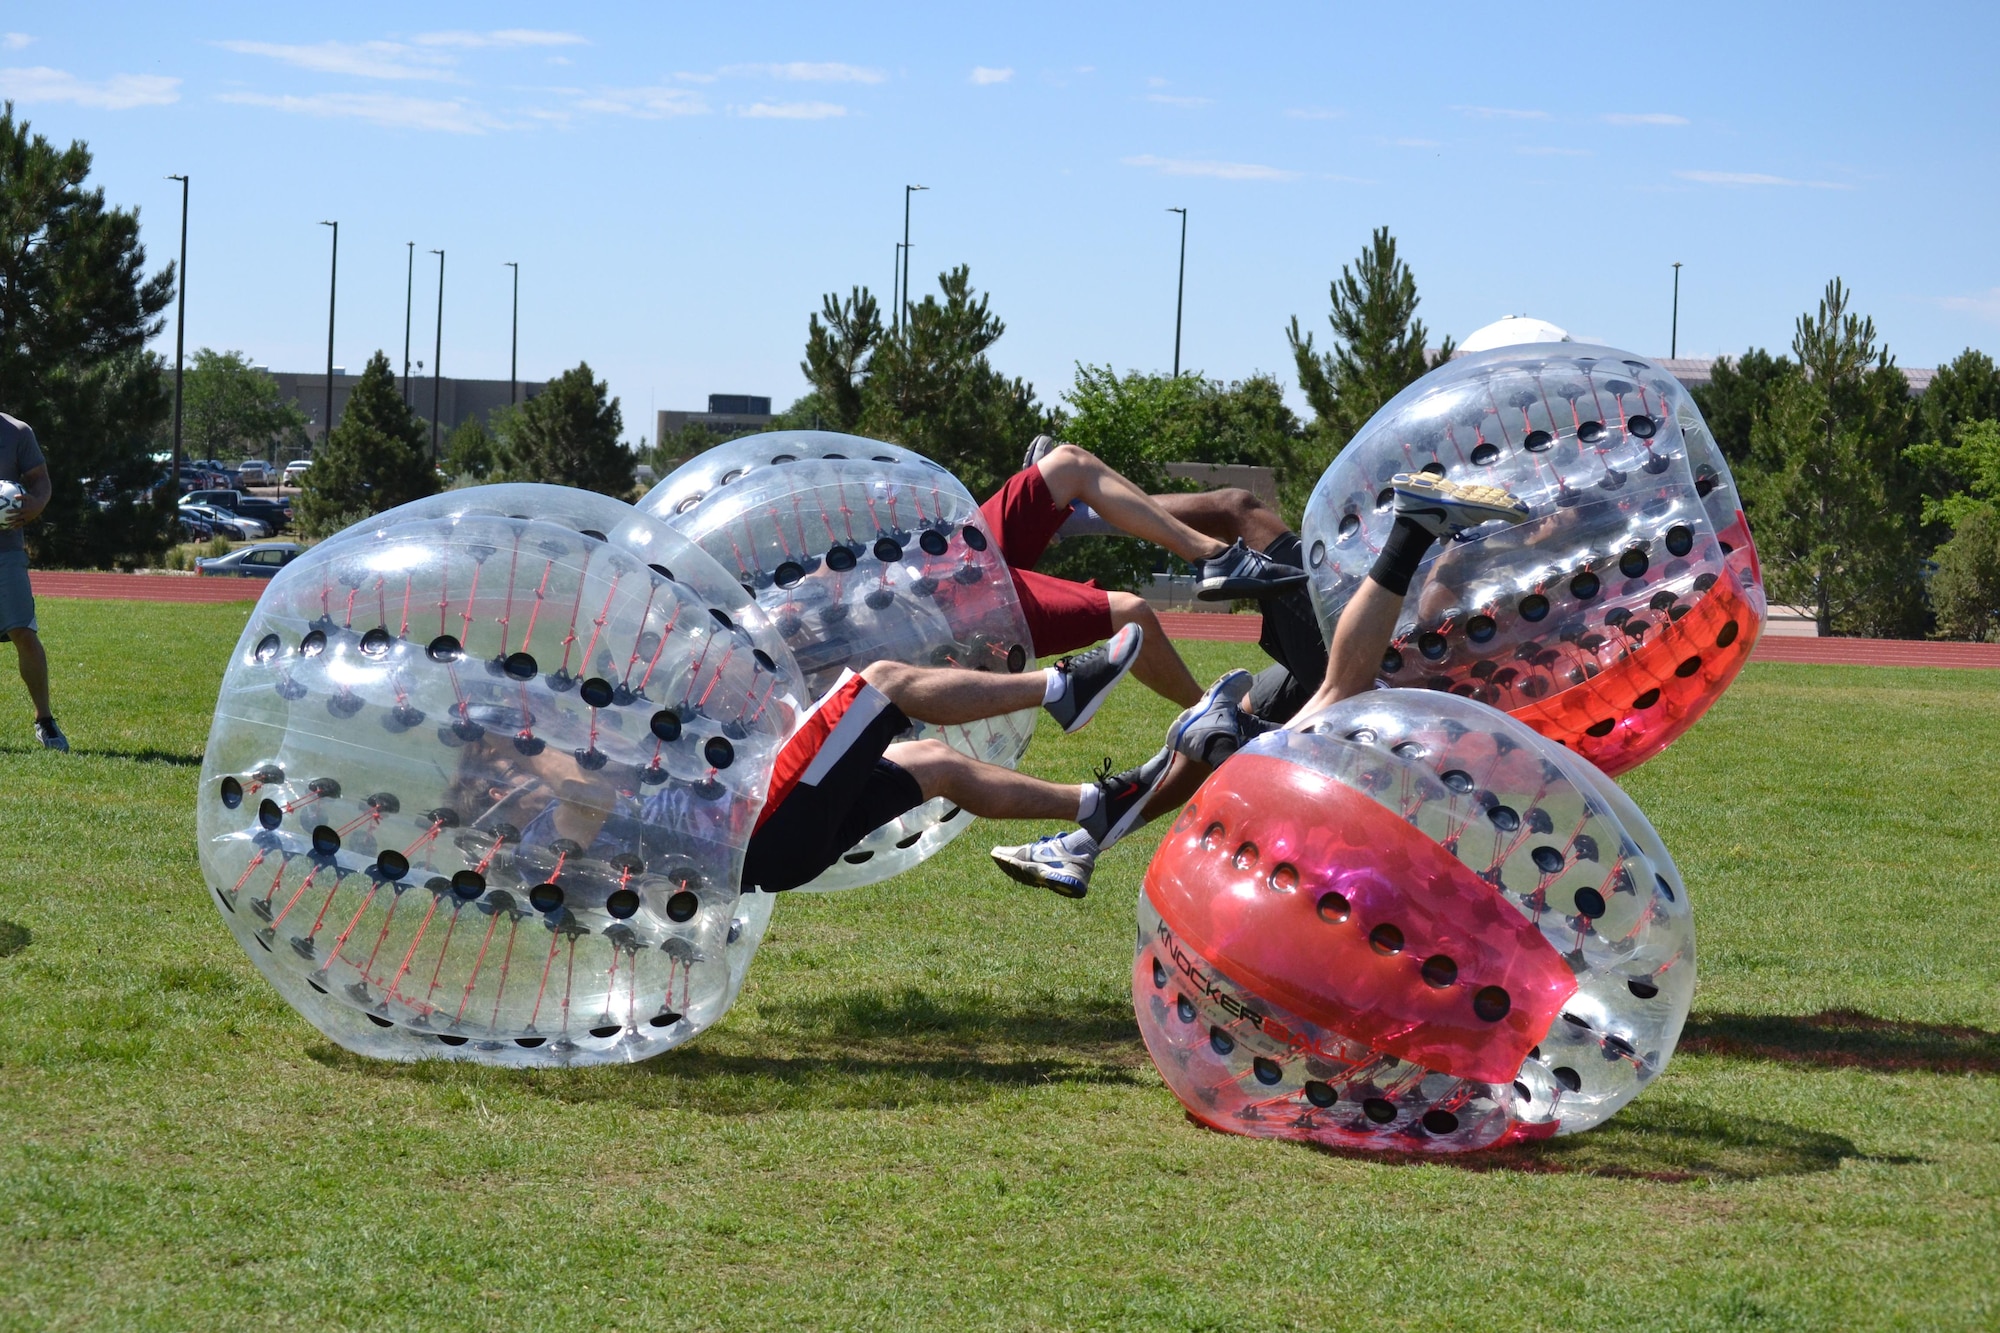 Knockerball players send each other flying during the Summer Slam Base Picnic at Schriever Air Force Base, Colorado, Friday, July 15, 2016. Knockerball is a soccer game that consists of two five-person teams inside large inflatable spheres that protect players from heavy impacts while playing. (U.S. Air Force photo/Brian Hagberg)